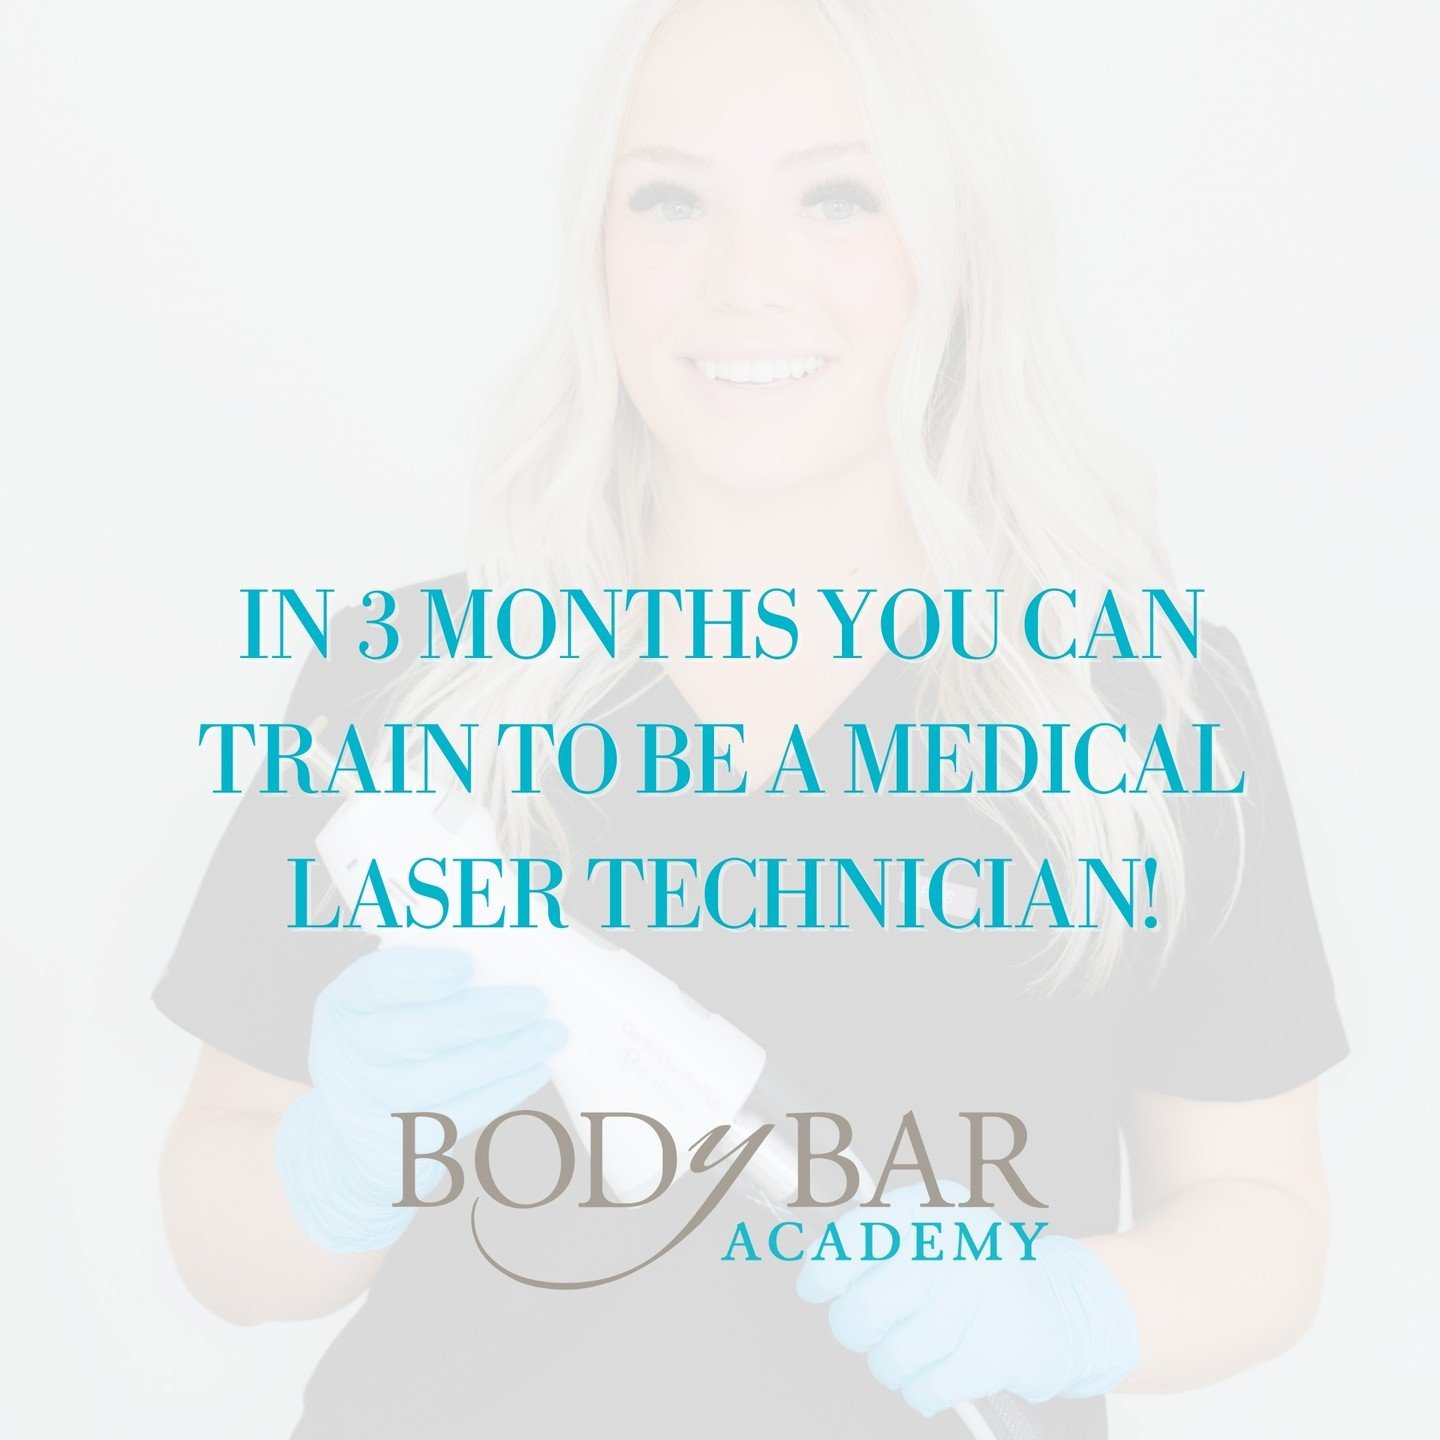 Enroll in Body Bar's Medical Laser program today and kickstart your journey to becoming a Medical Laser Technician in just 3 months, starting April 22nd!⁠
⁠
What you'll learn:⁠
◽️Laser Hair Removal⁠
◽️Laser Skin Rejuvenation &amp; Laser Skin Tighteni